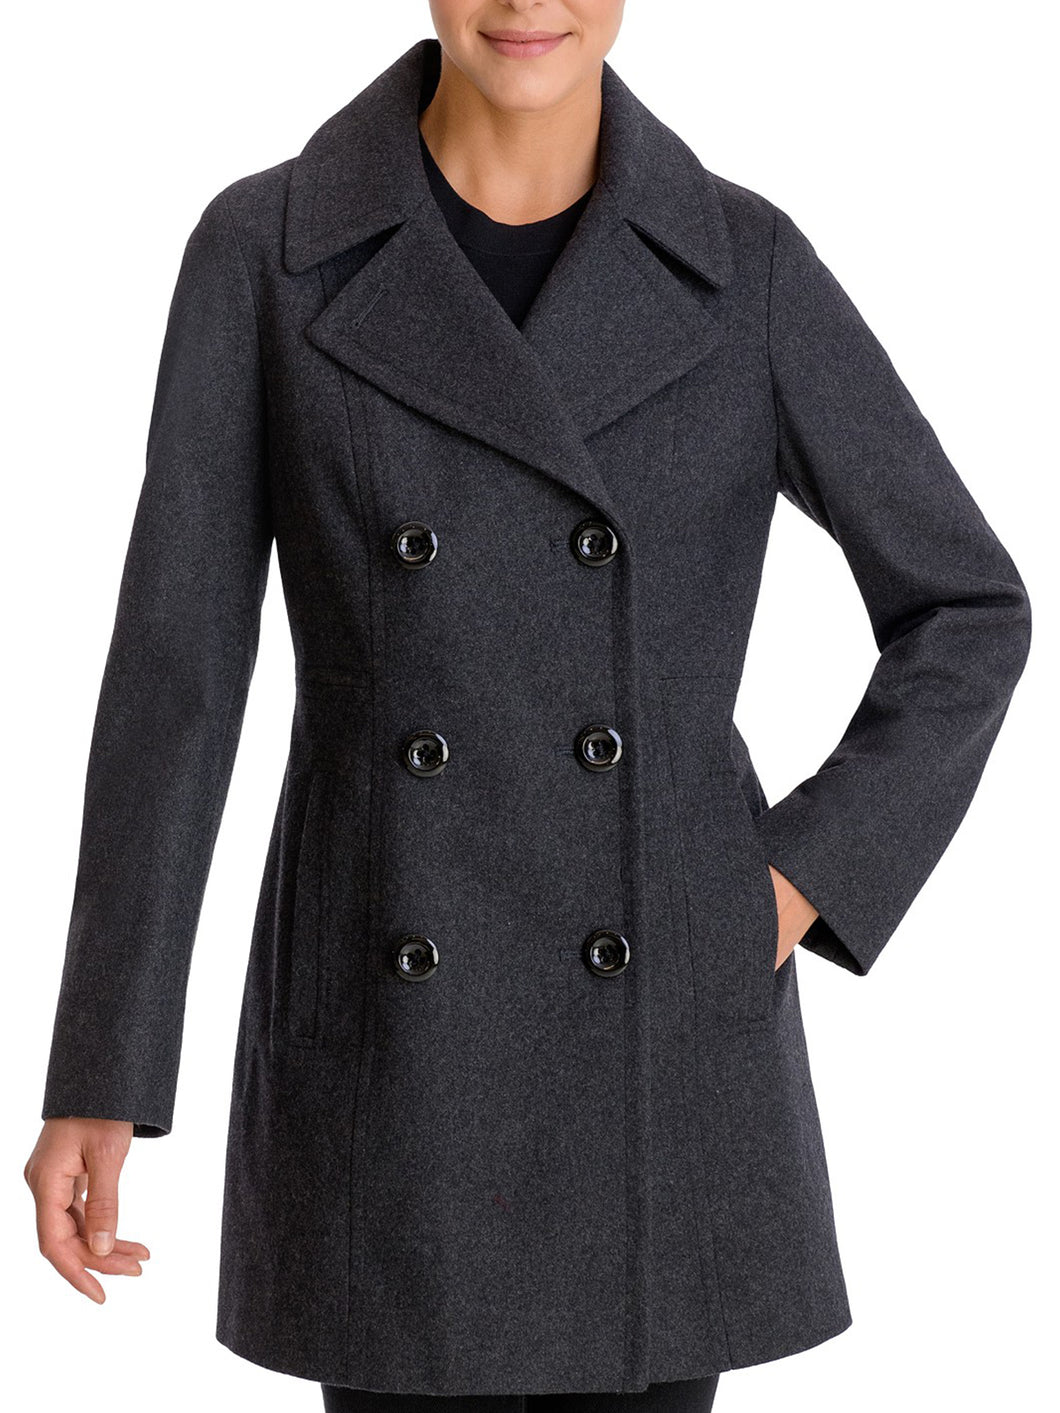 Womens Double Breasted Peacoat